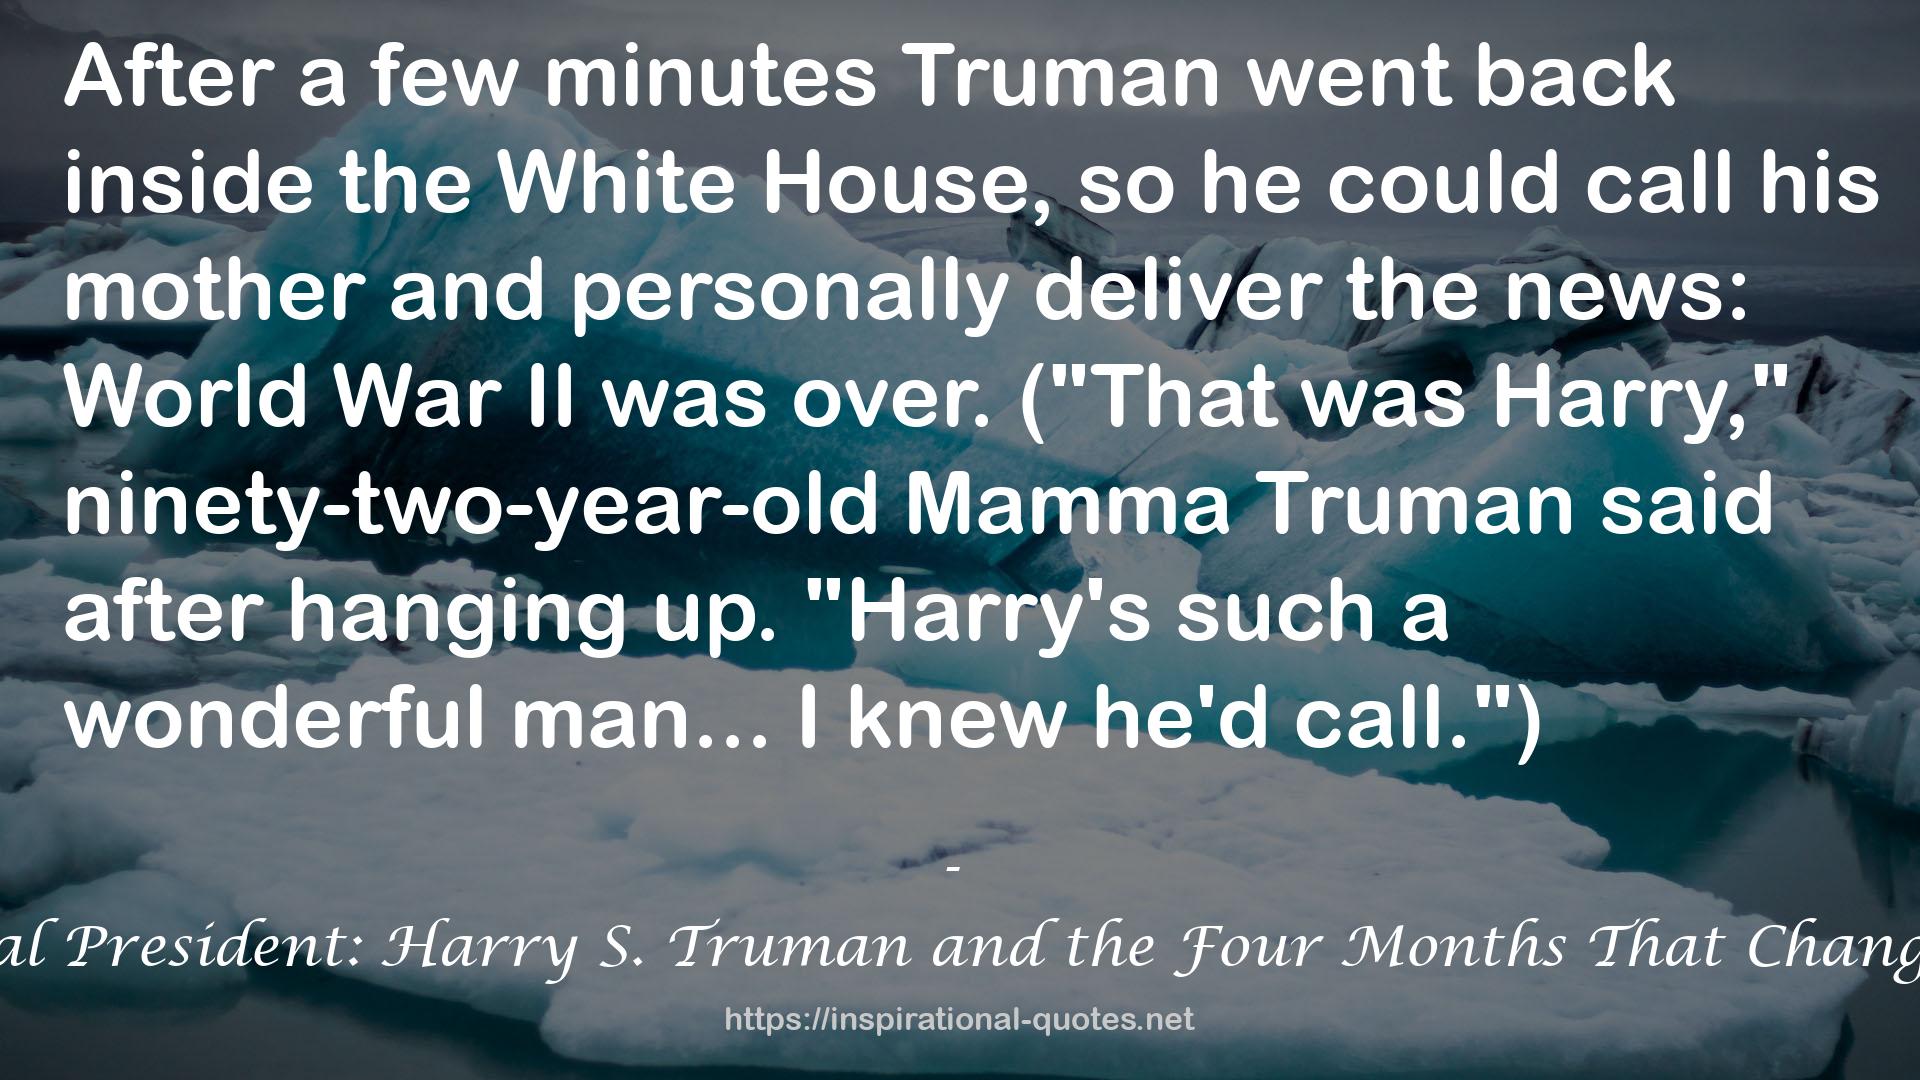 The Accidental President: Harry S. Truman and the Four Months That Changed the World QUOTES